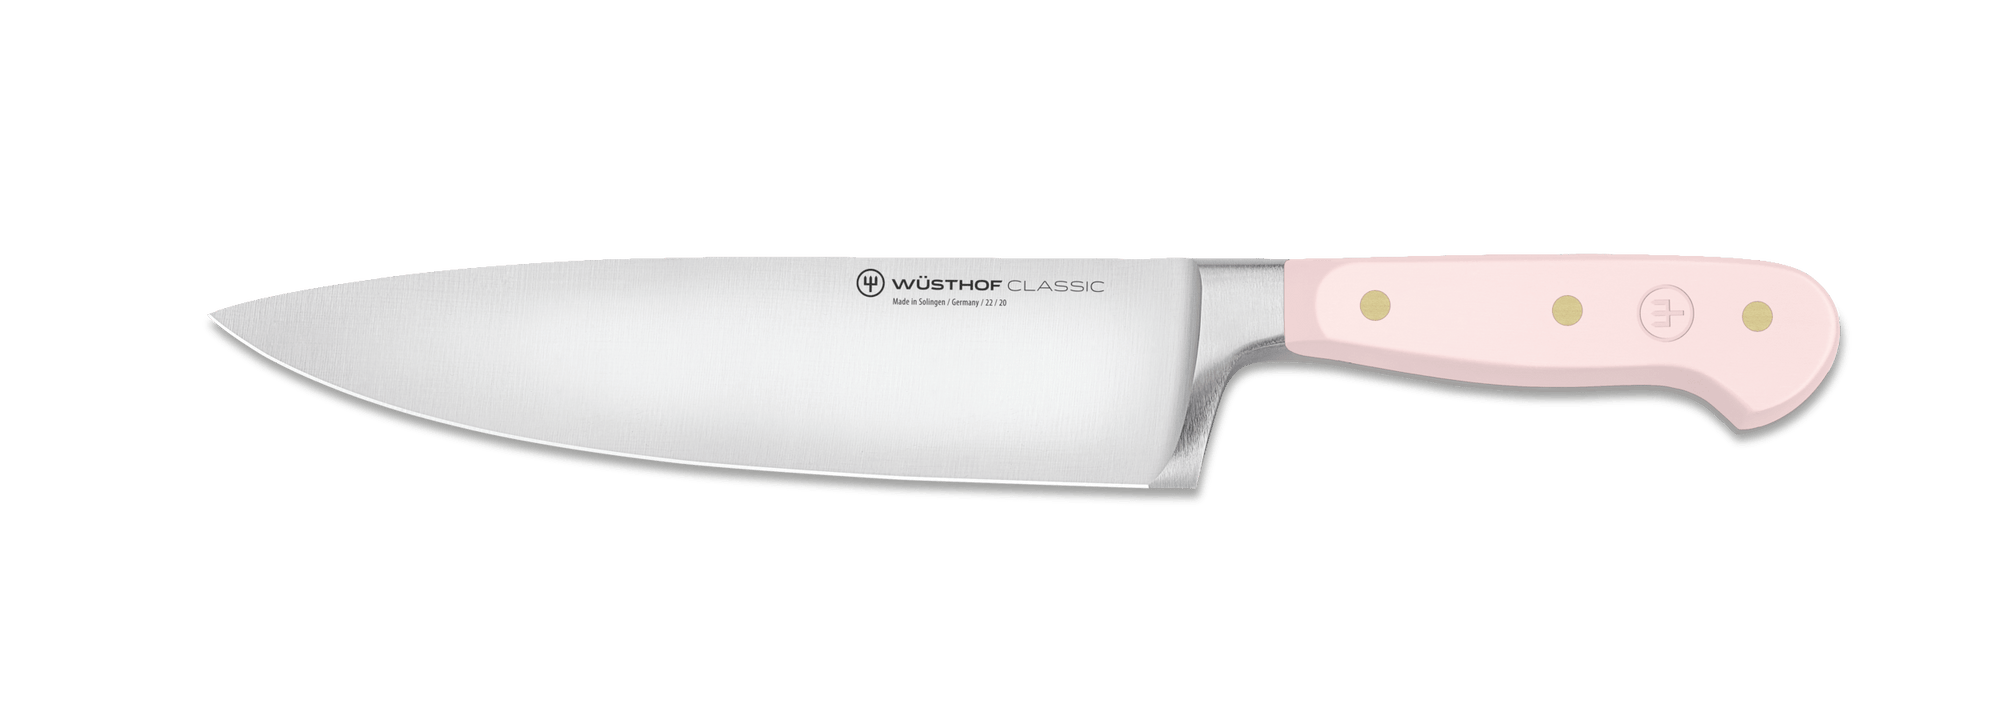 Wusthof Classic 8" Chef's Knife - Pink